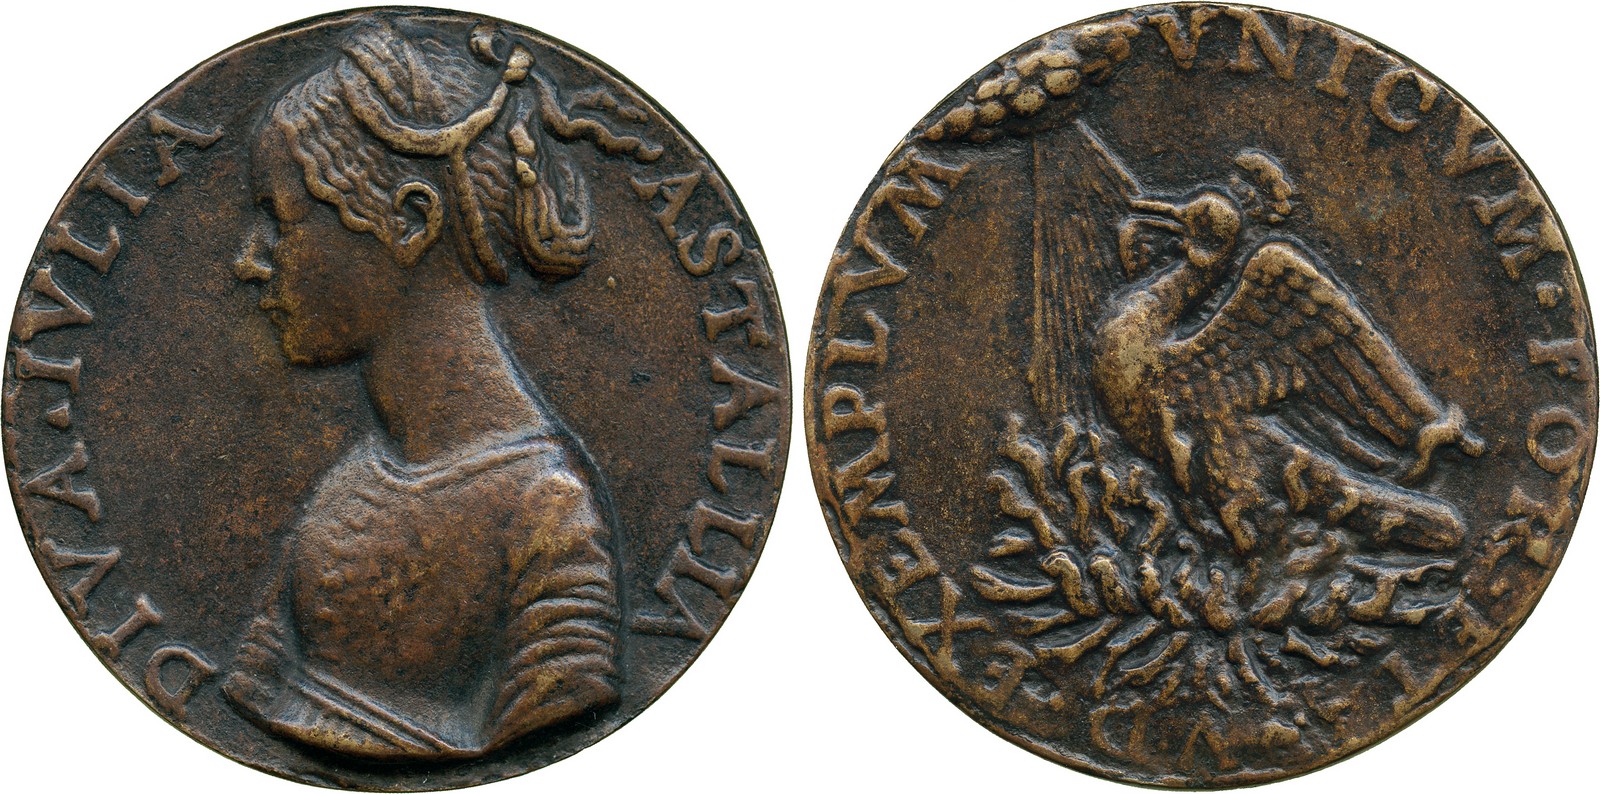 COMMEMORATIVE MEDALS, WORLD MEDALS, Italy, Giulia Astallia, Cast Bronze Medal, by Pier Jacopo di